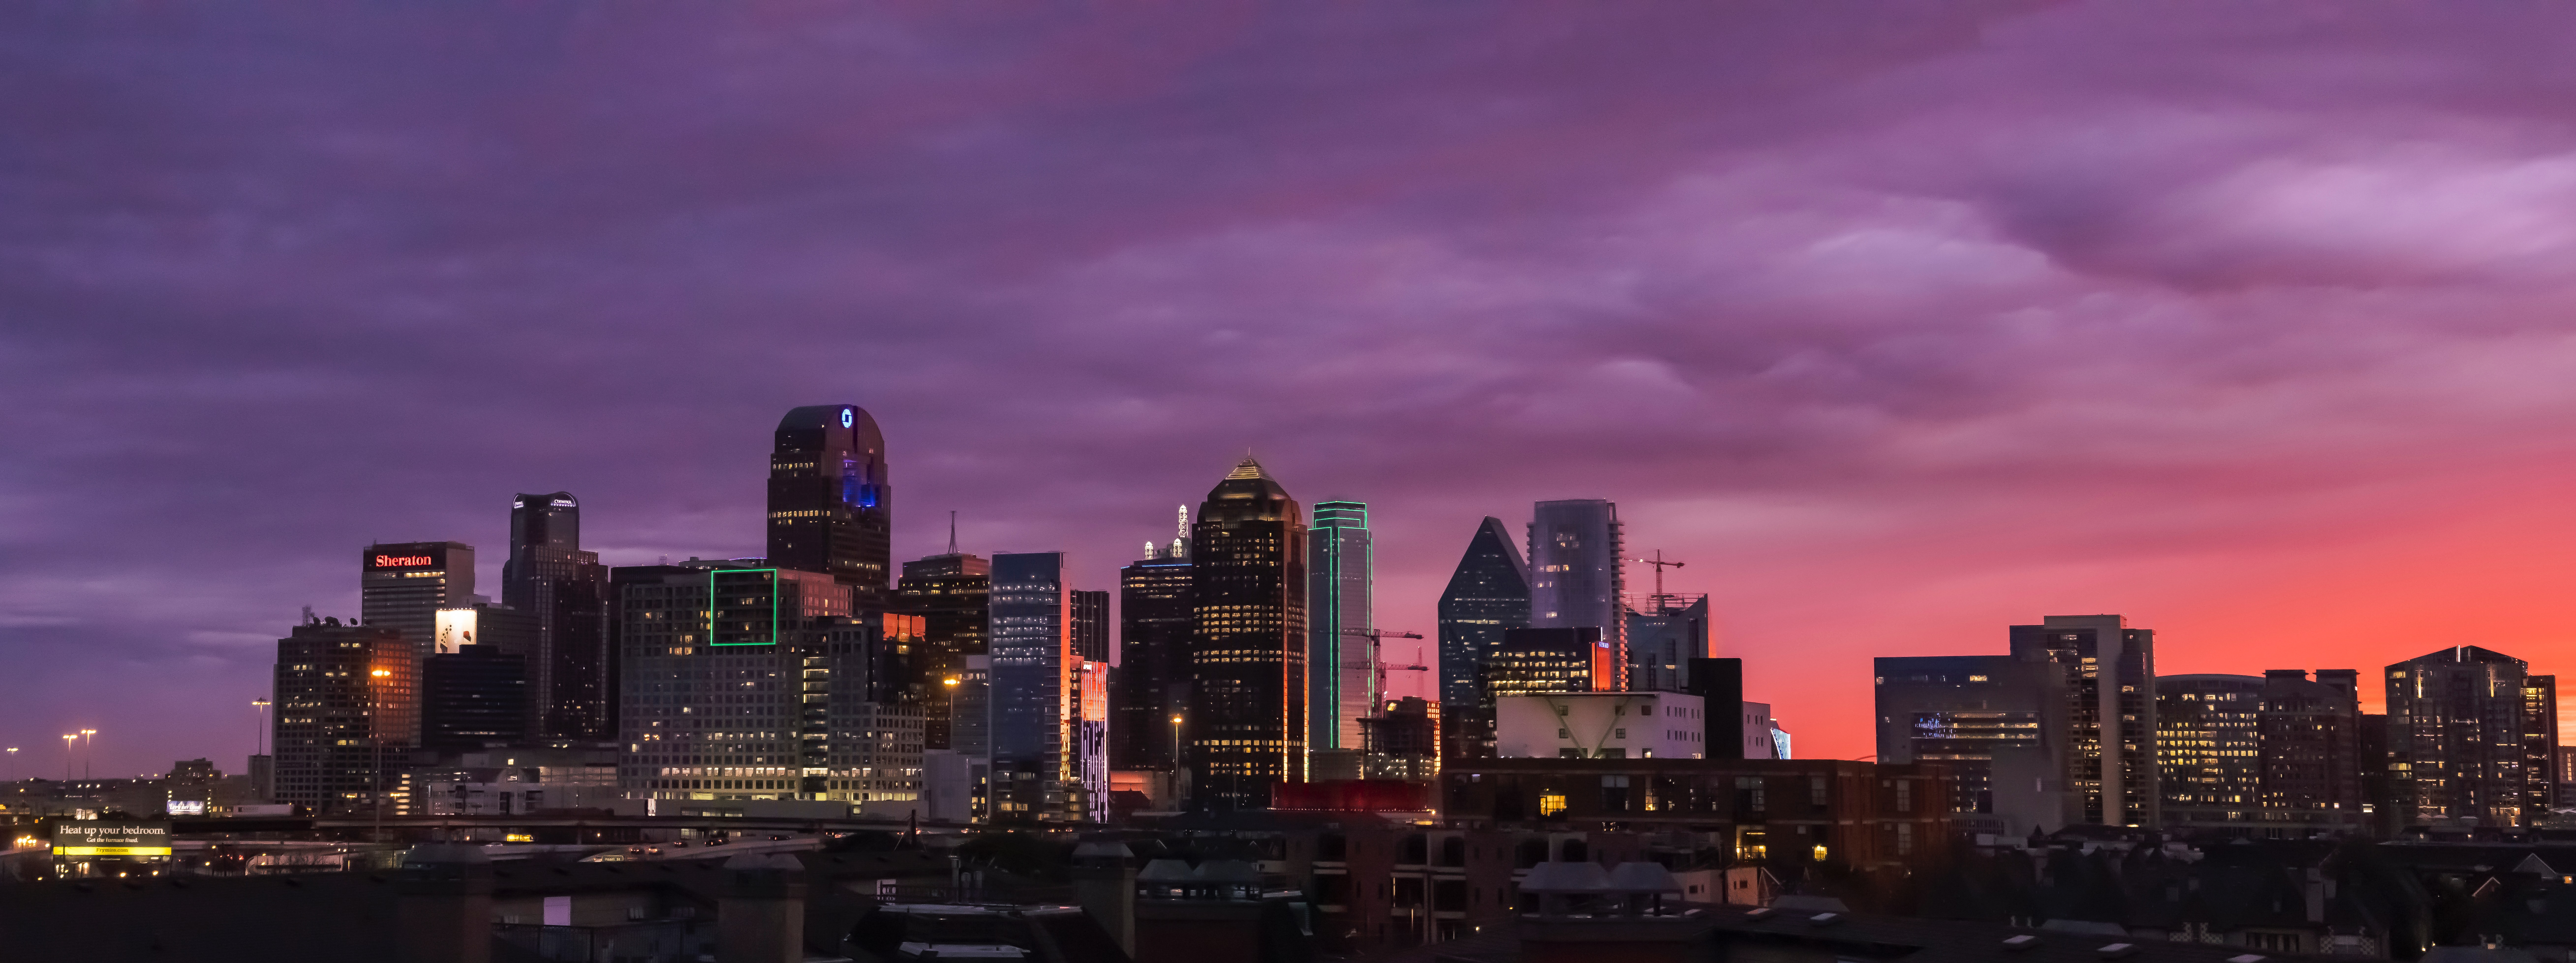 Dallas, Texas, The Moster Law Firm, City, Power, Energy